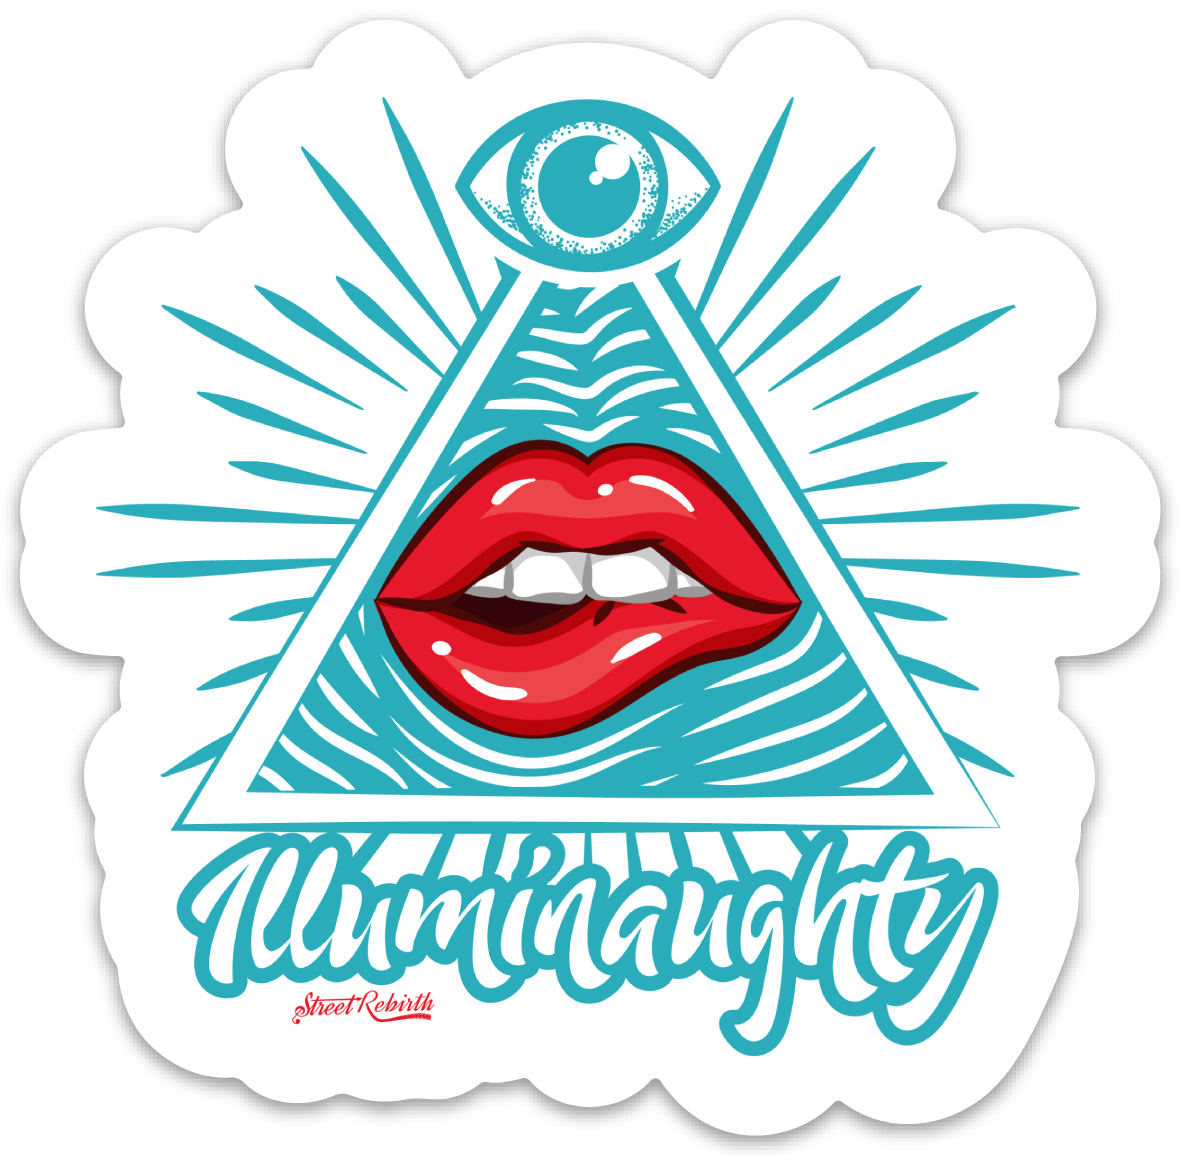 ILLUMINAUGHTY PUN STICKER – ONE 4 INCH WATER PROOF VINYL STICKER – FOR HYDRO FLASK, SKATEBOARD, LAPTOP, PLANNER, CAR, COLLECTING, GIFTING